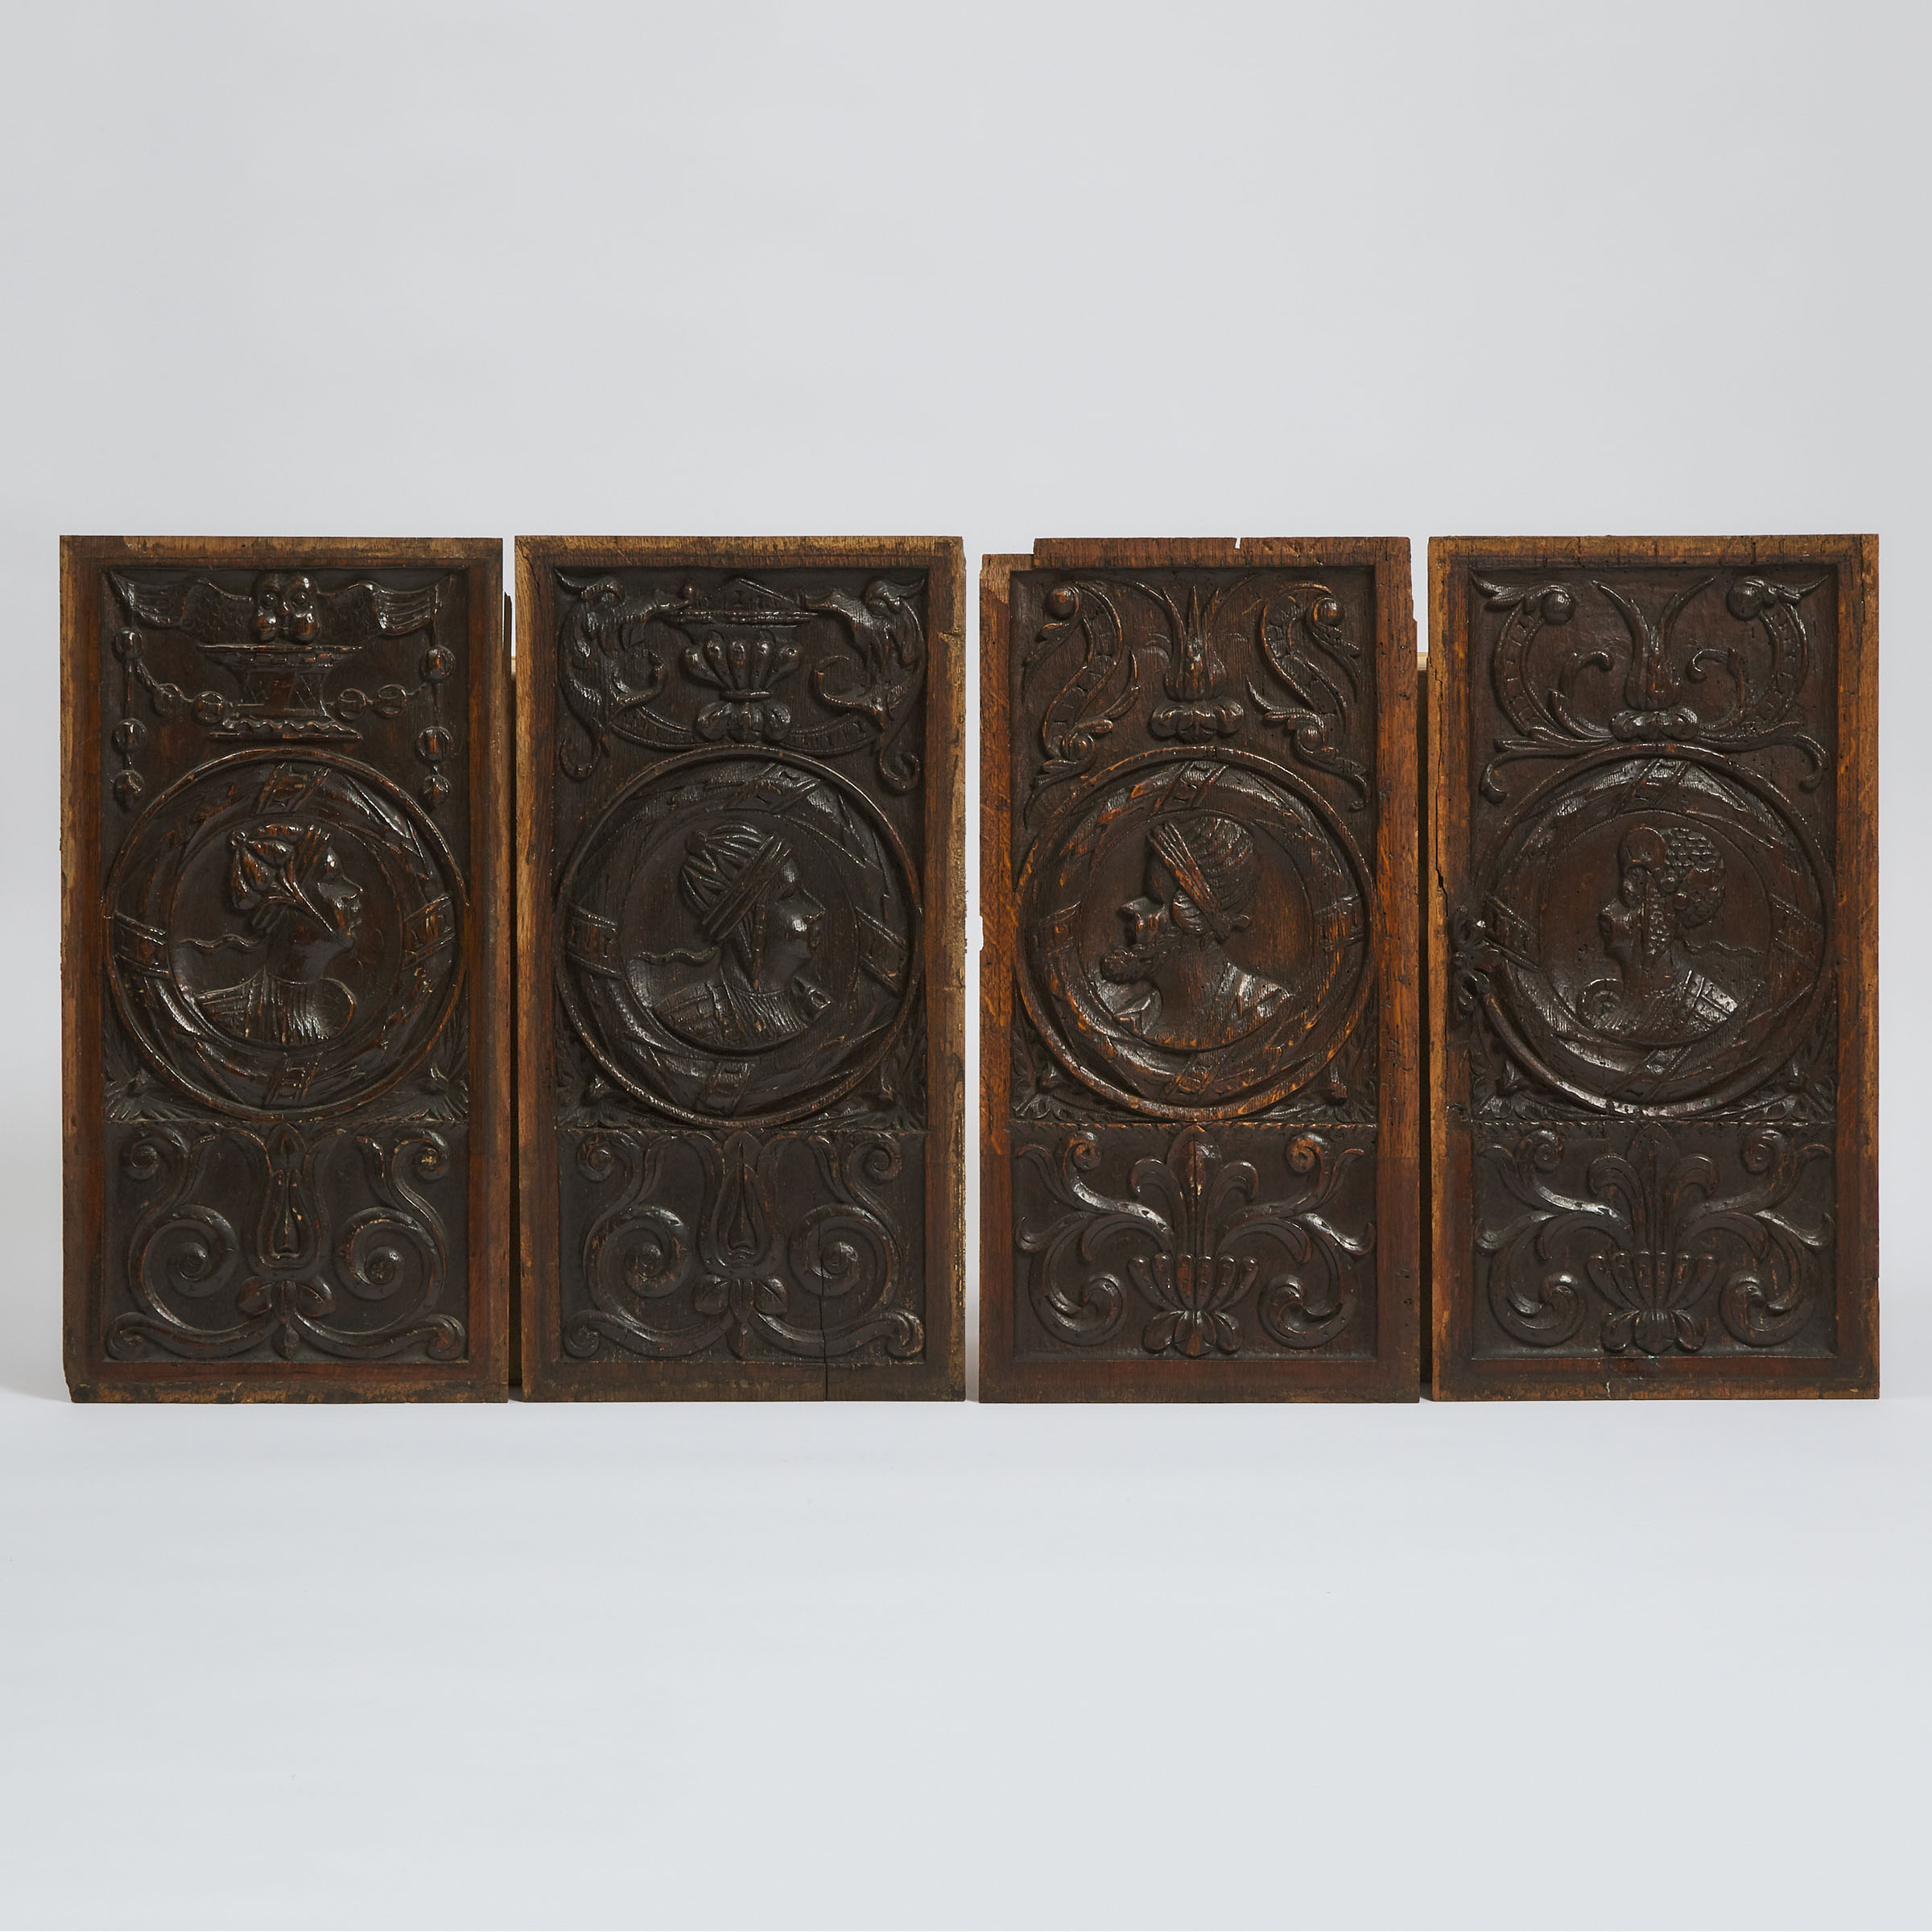 Matched Set of Four English Relief 3abcff